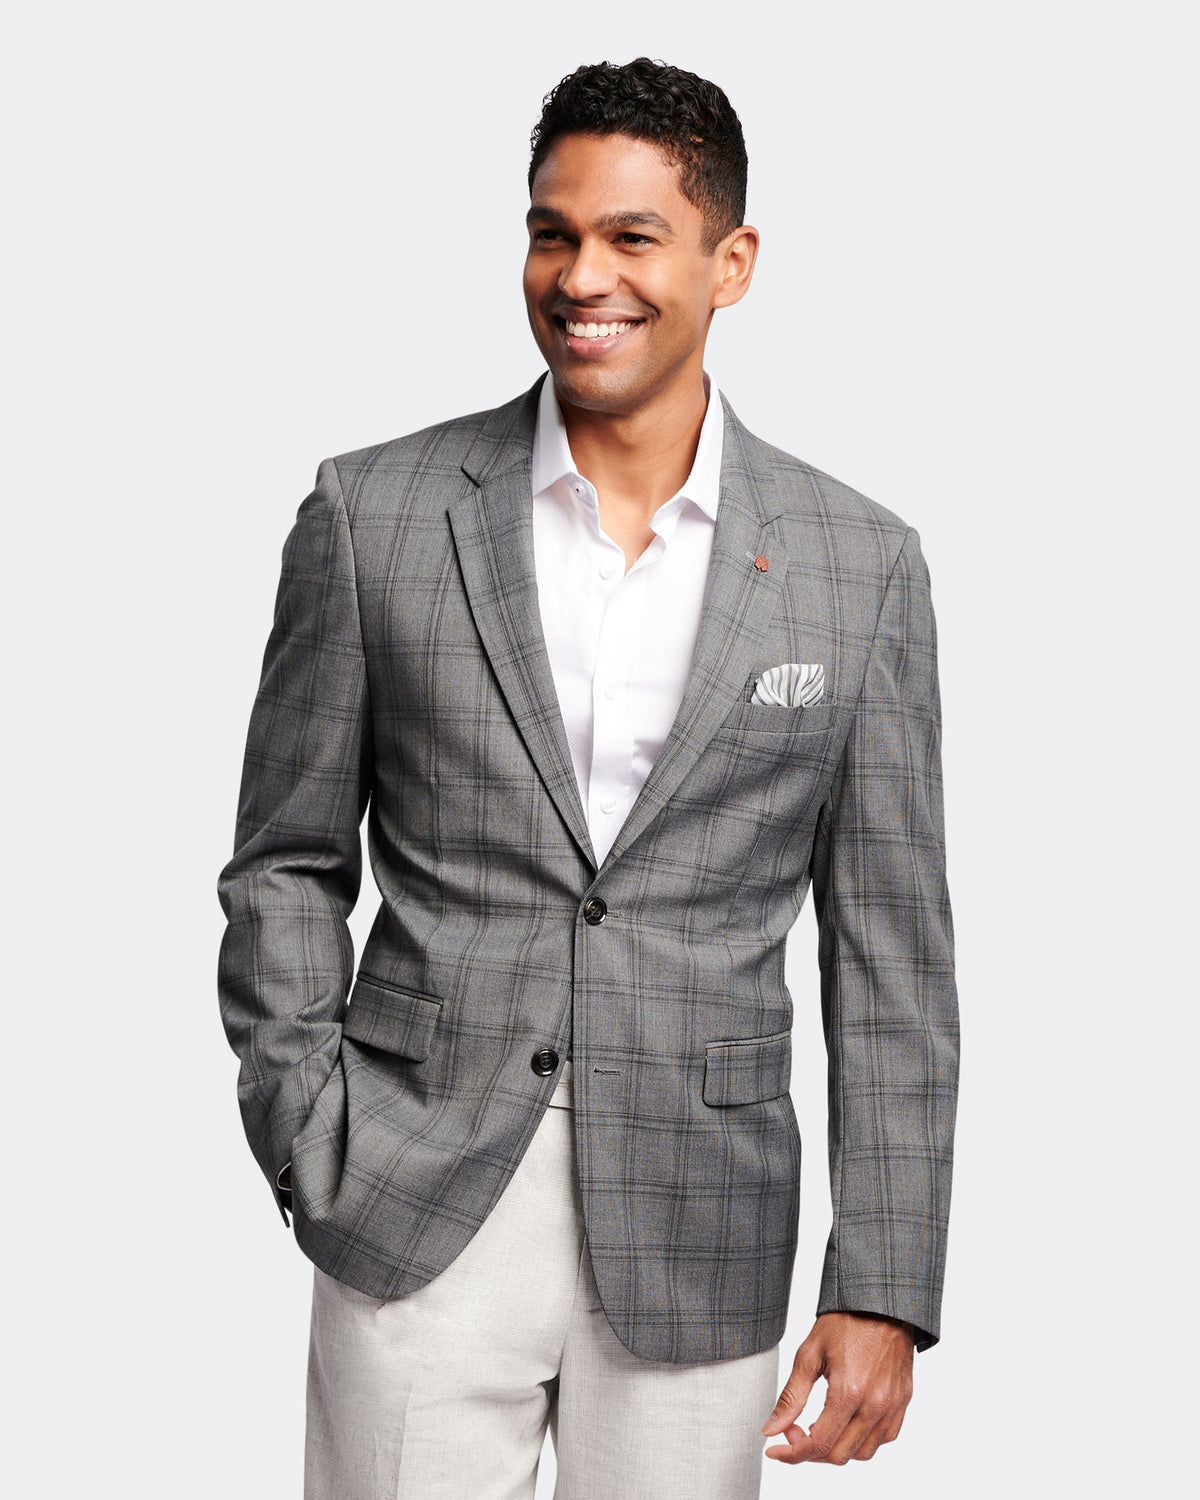 BFU953 Grey Blazer  https://harrysformenswear.com.au/products/copy-of-bfu951-carmel-blazer  Brookfield Luxe Blazers are expertly crafted with top notch fabrics and construction. This style is modern and sleek with an extra hint of luxury, so you can be sure you'll look sharp in any situation. Our tailored fits are designed to help you look like the professional man you are. Features: Modern fit, Easy Care, 95…